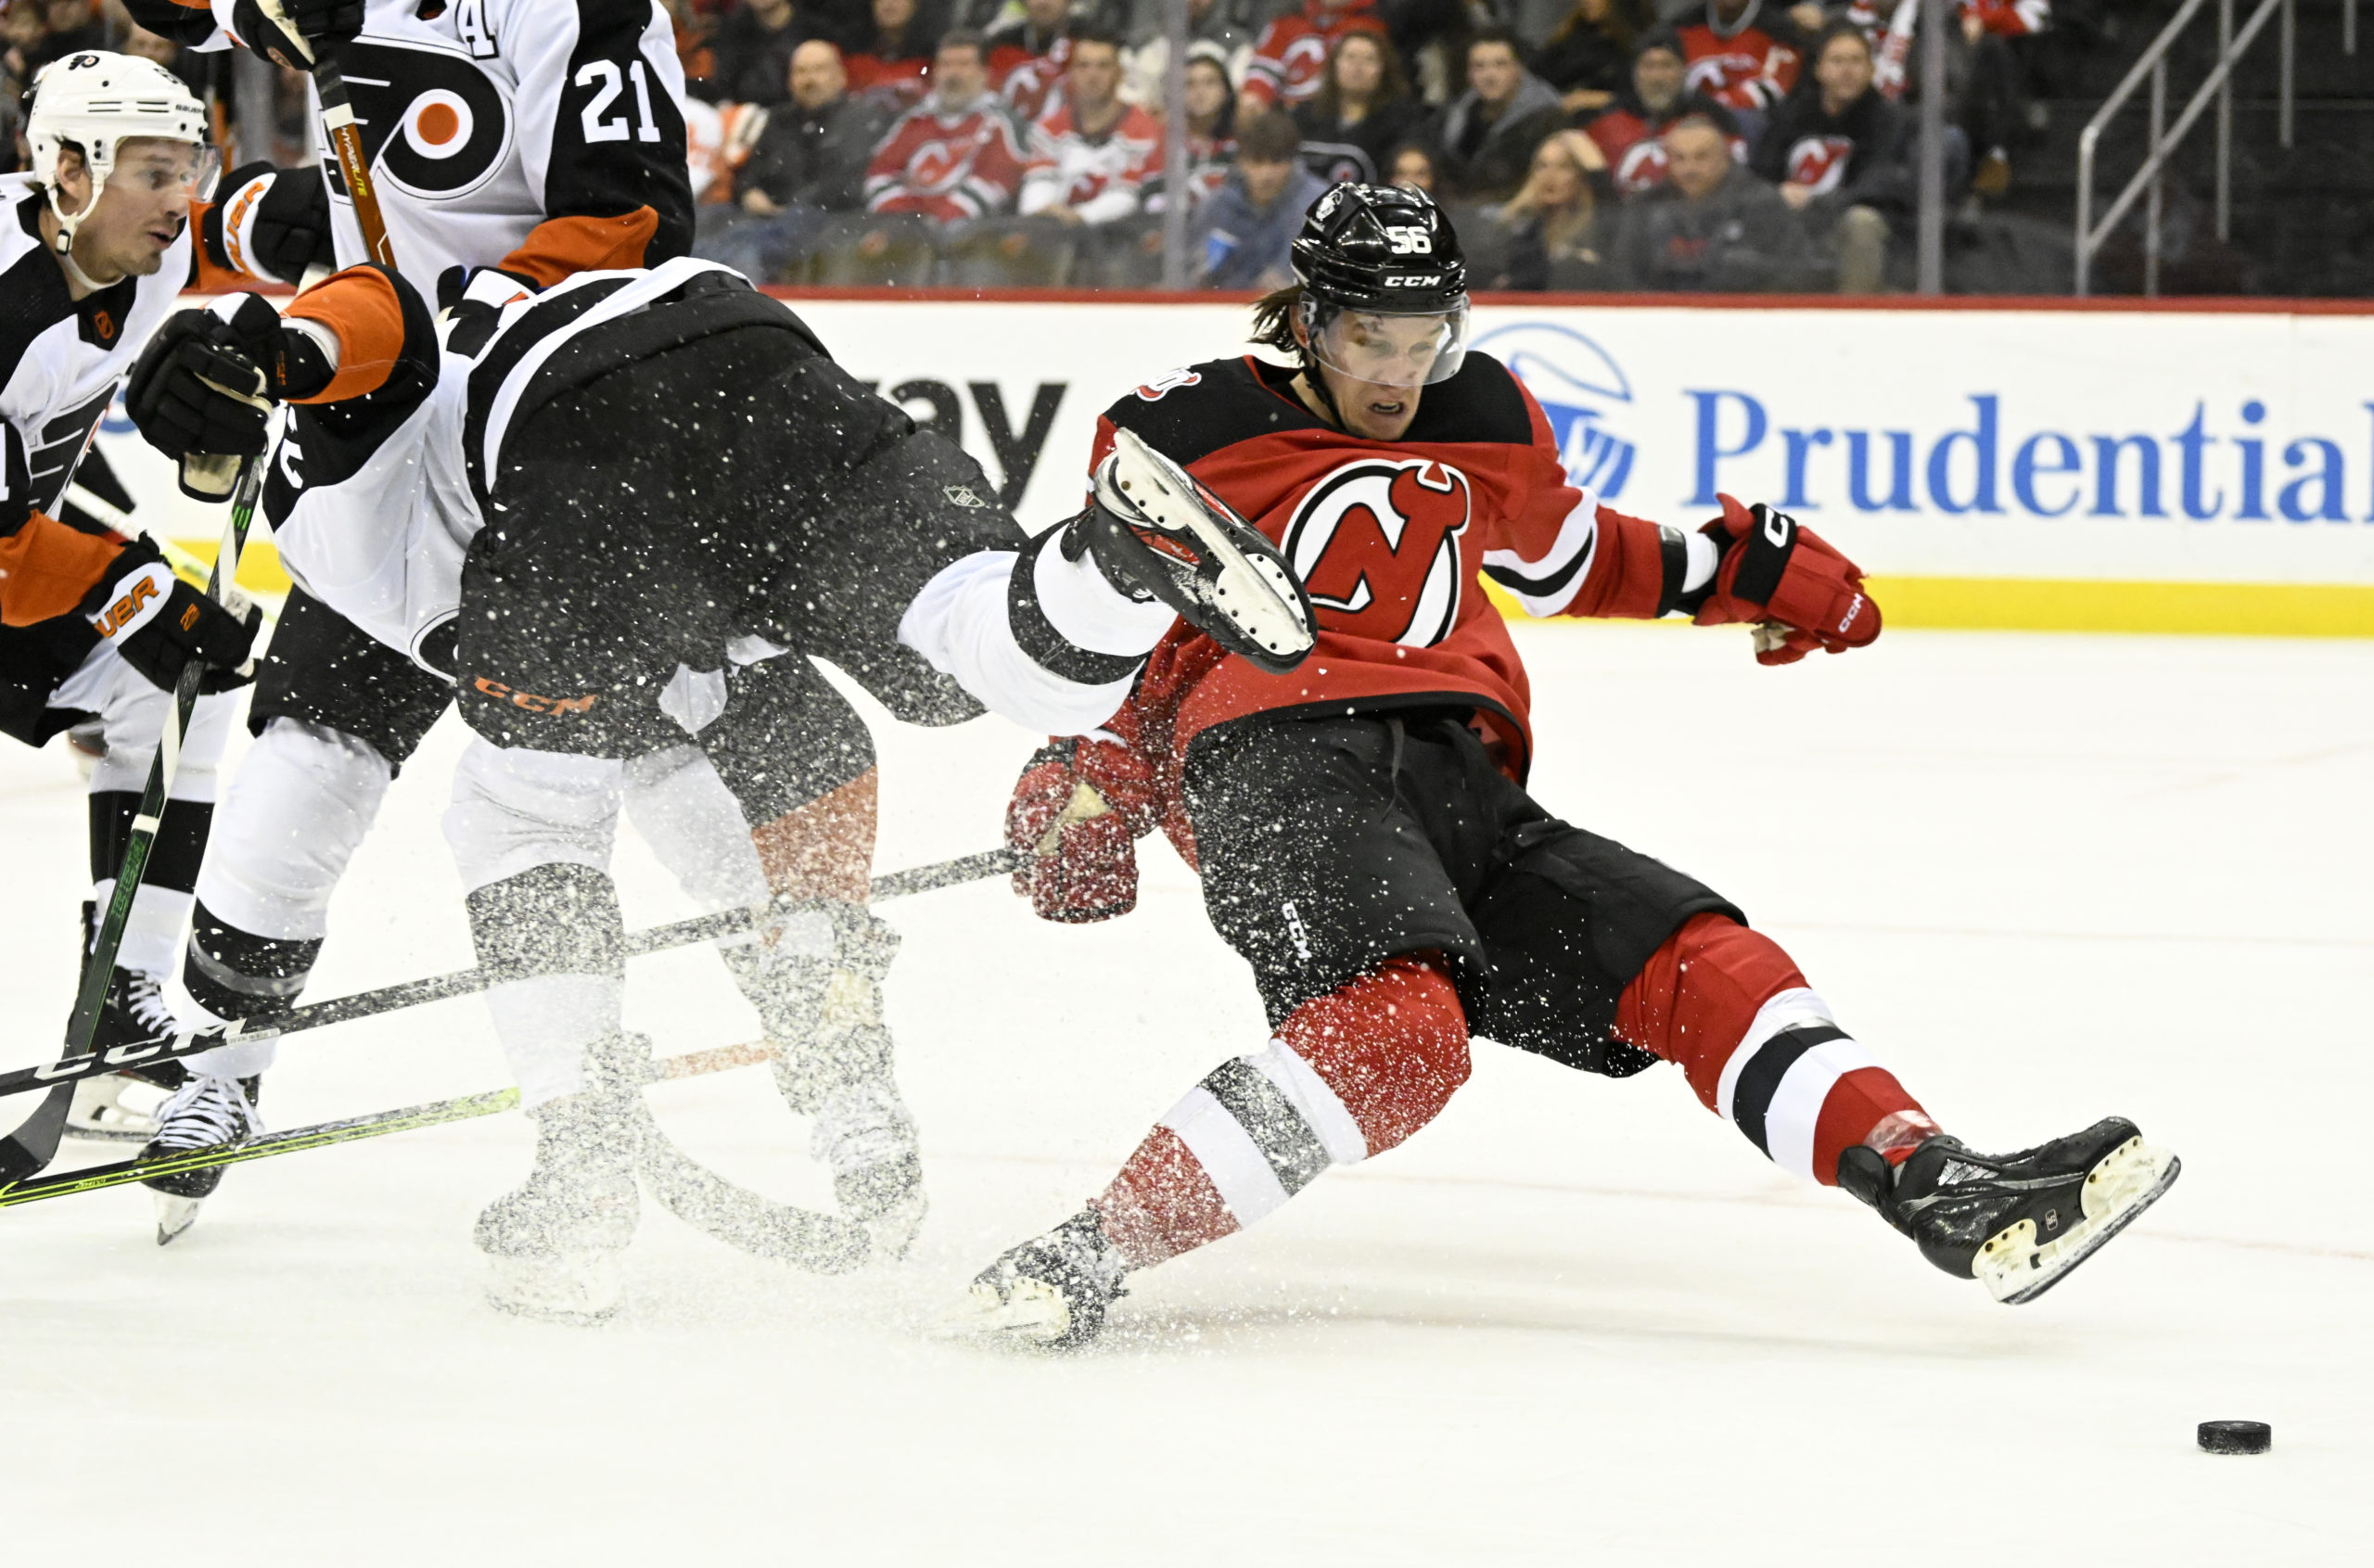 Devils Set Franchise Record in Win over Flyers - Jersey Sporting News